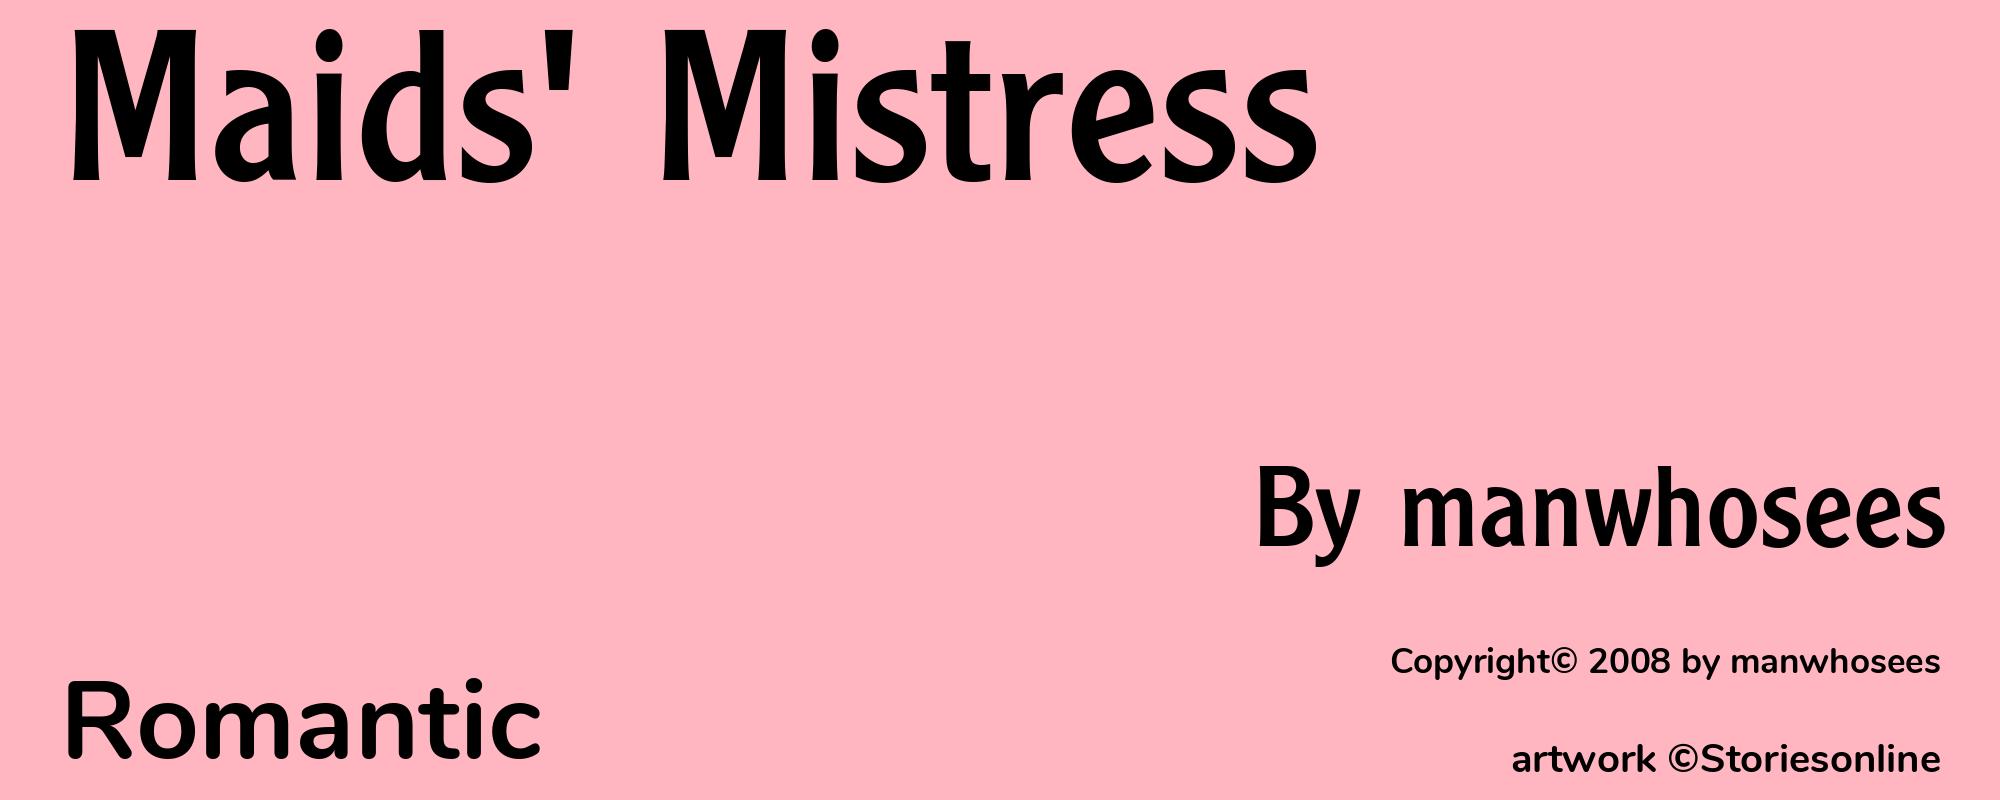 Maids' Mistress - Cover